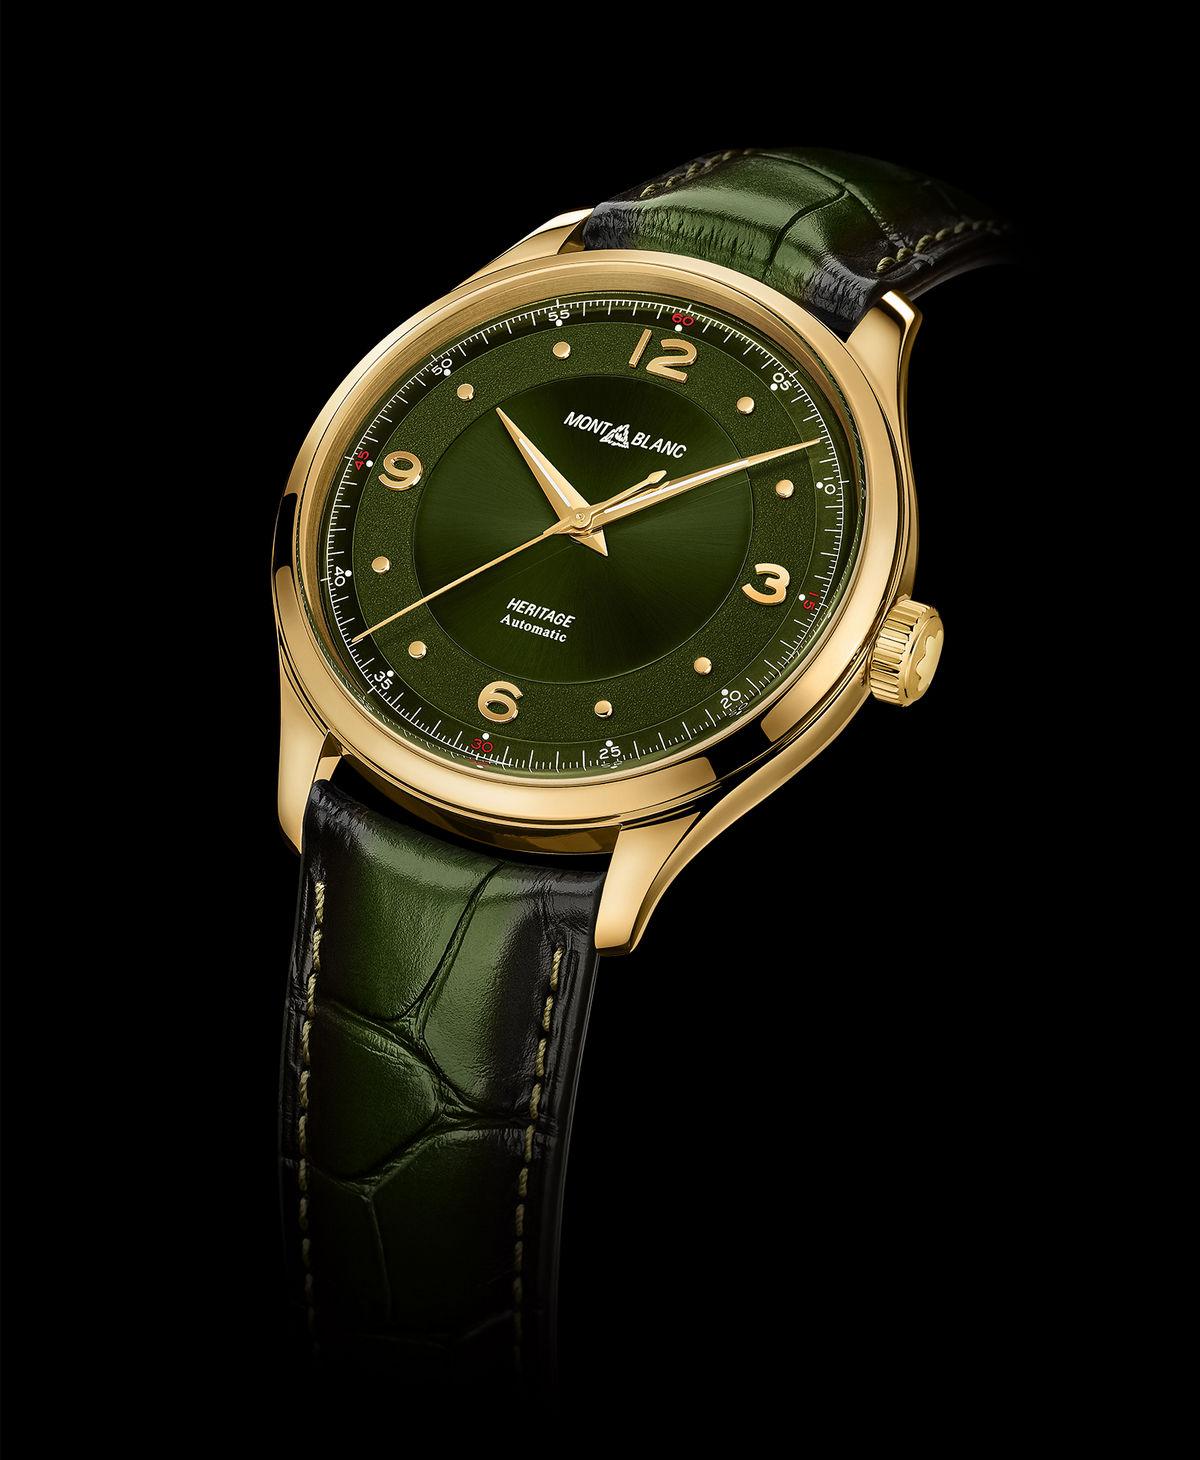 Montblanc?s new Heritage watches are inspired by the classic Minerva timepieces from the 40s and ?50s